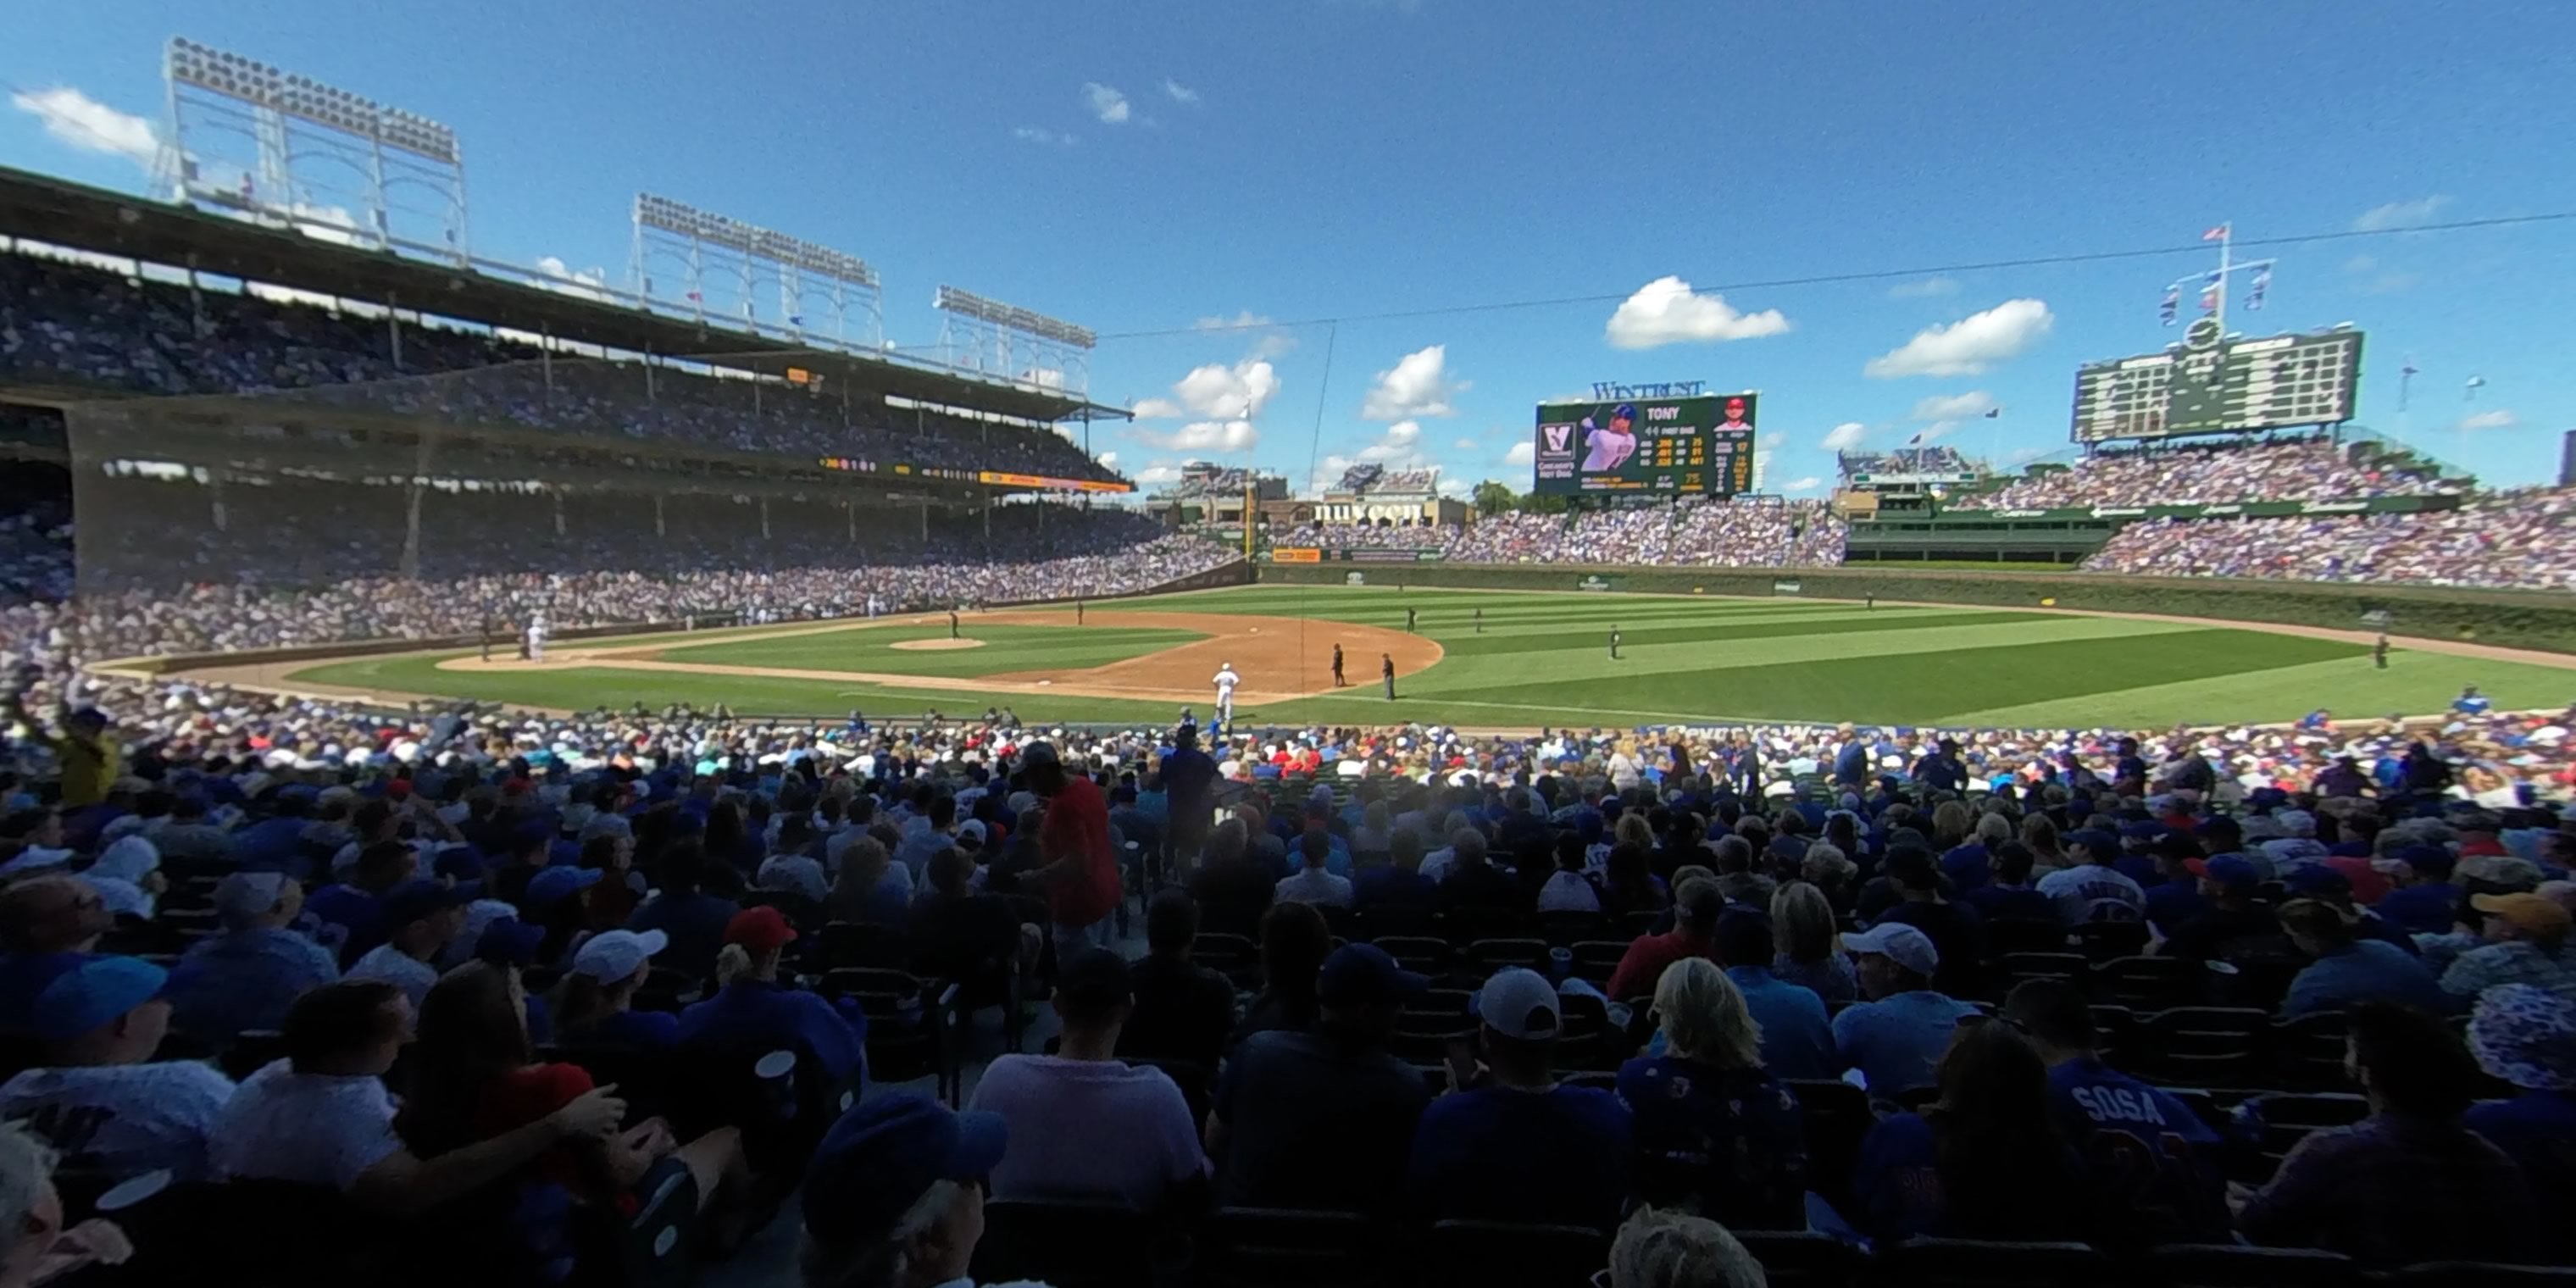 section 126 panoramic seat view  for baseball - wrigley field